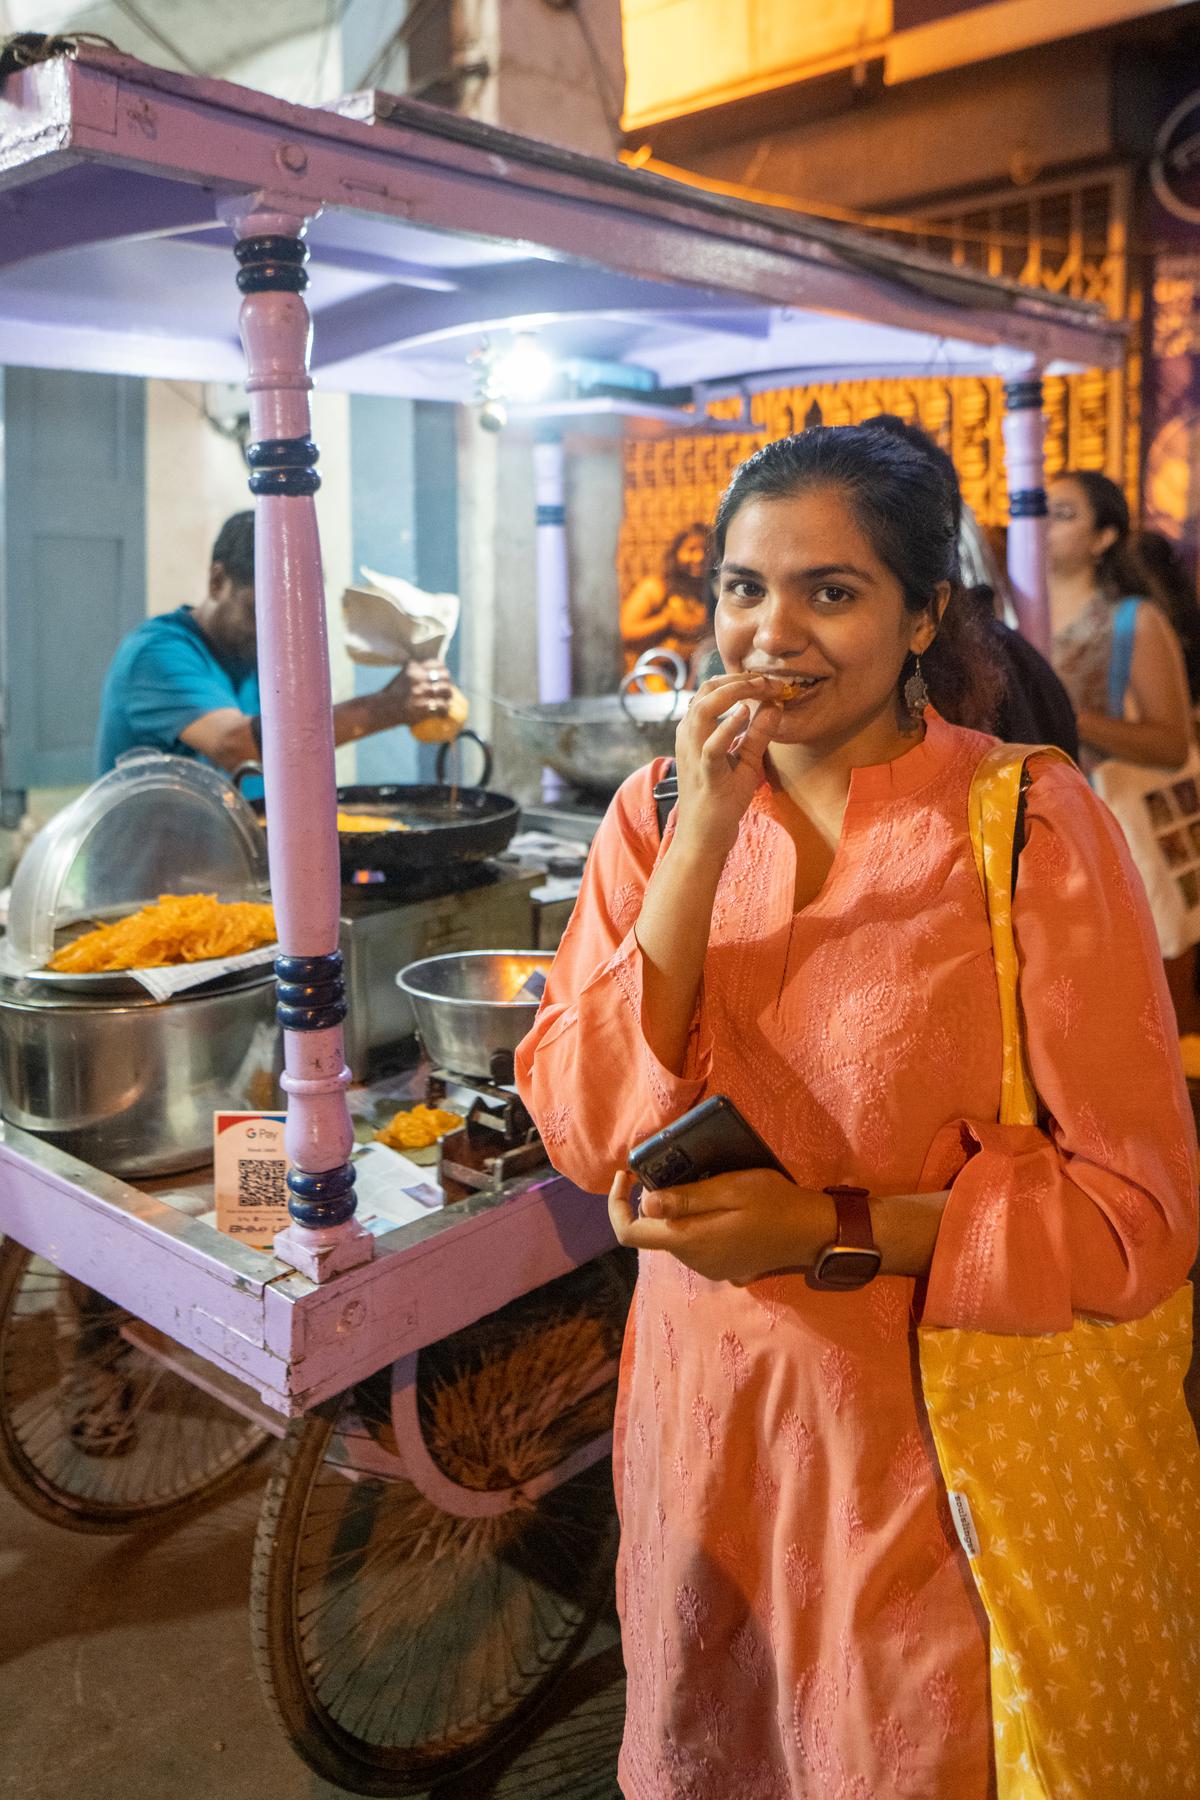 Tulica Bhattacharya, a 24-year-old consultant in the city tried hot jalebis from a street cart in Chickpet during the walk.